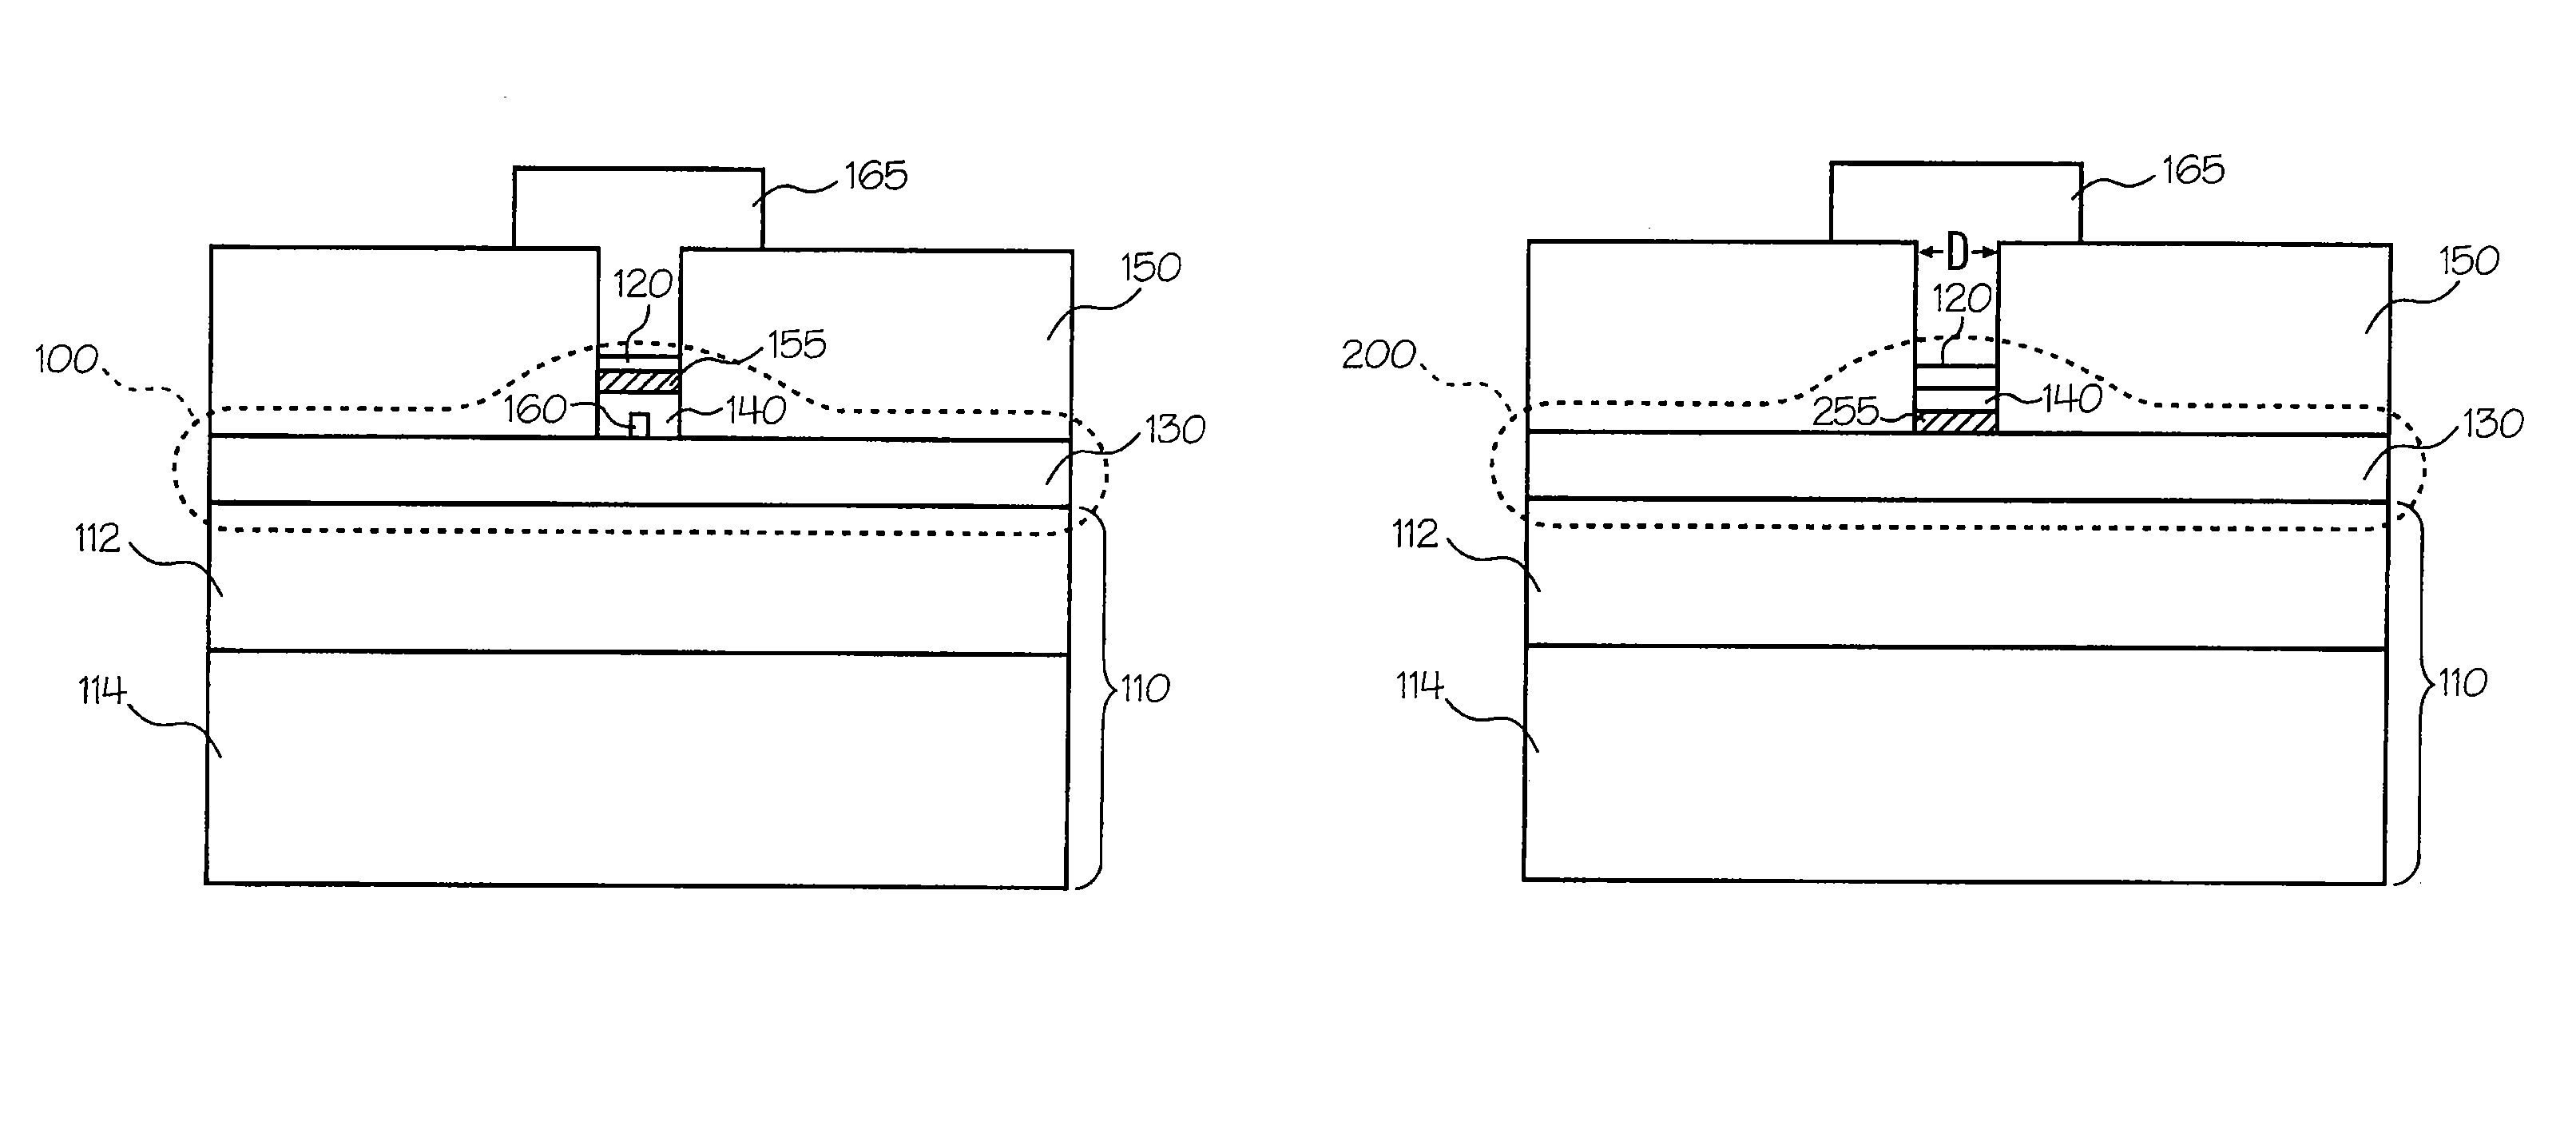 Programmable metallization cell structures including an oxide electrolyte, devices including the structure and method of forming same